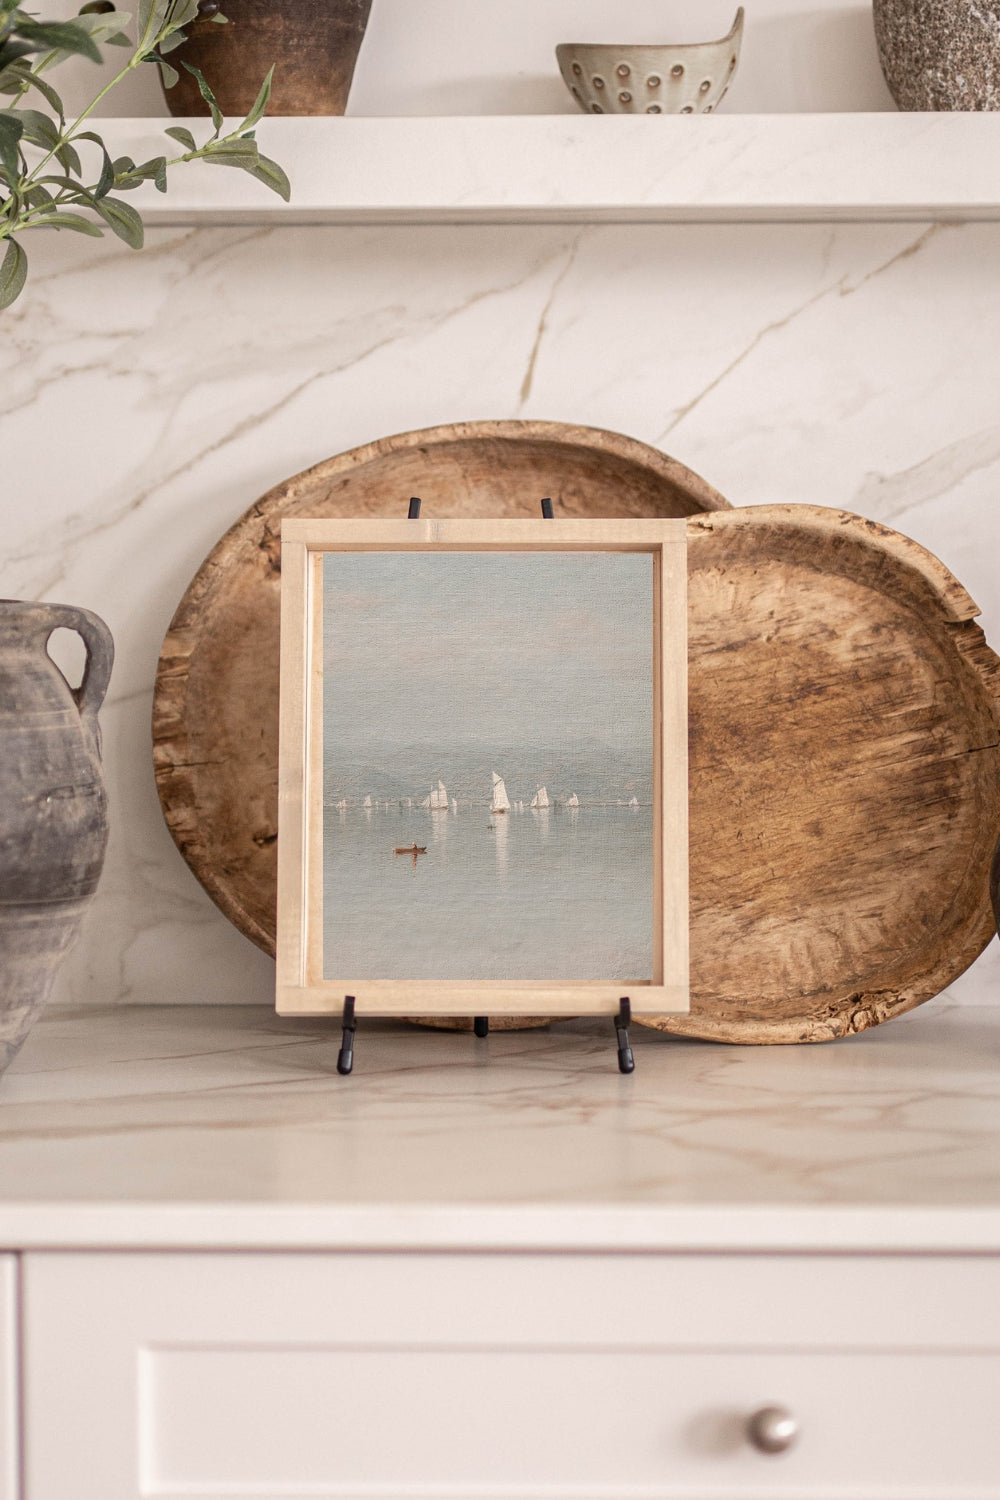 Vintage wood-framed print of sailboats on the water